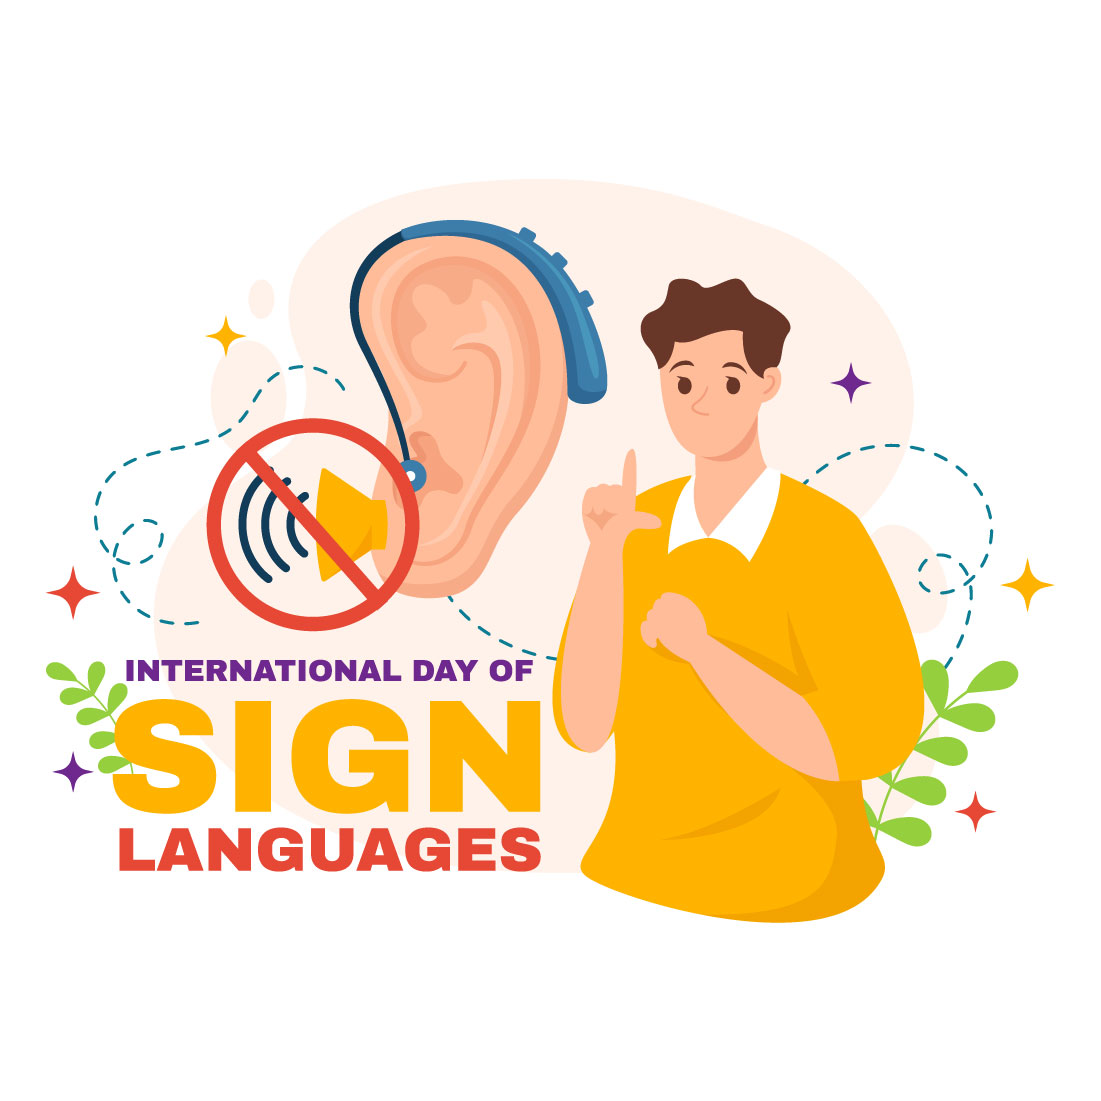 12 International Day of Sign Languages Illustration cover image.